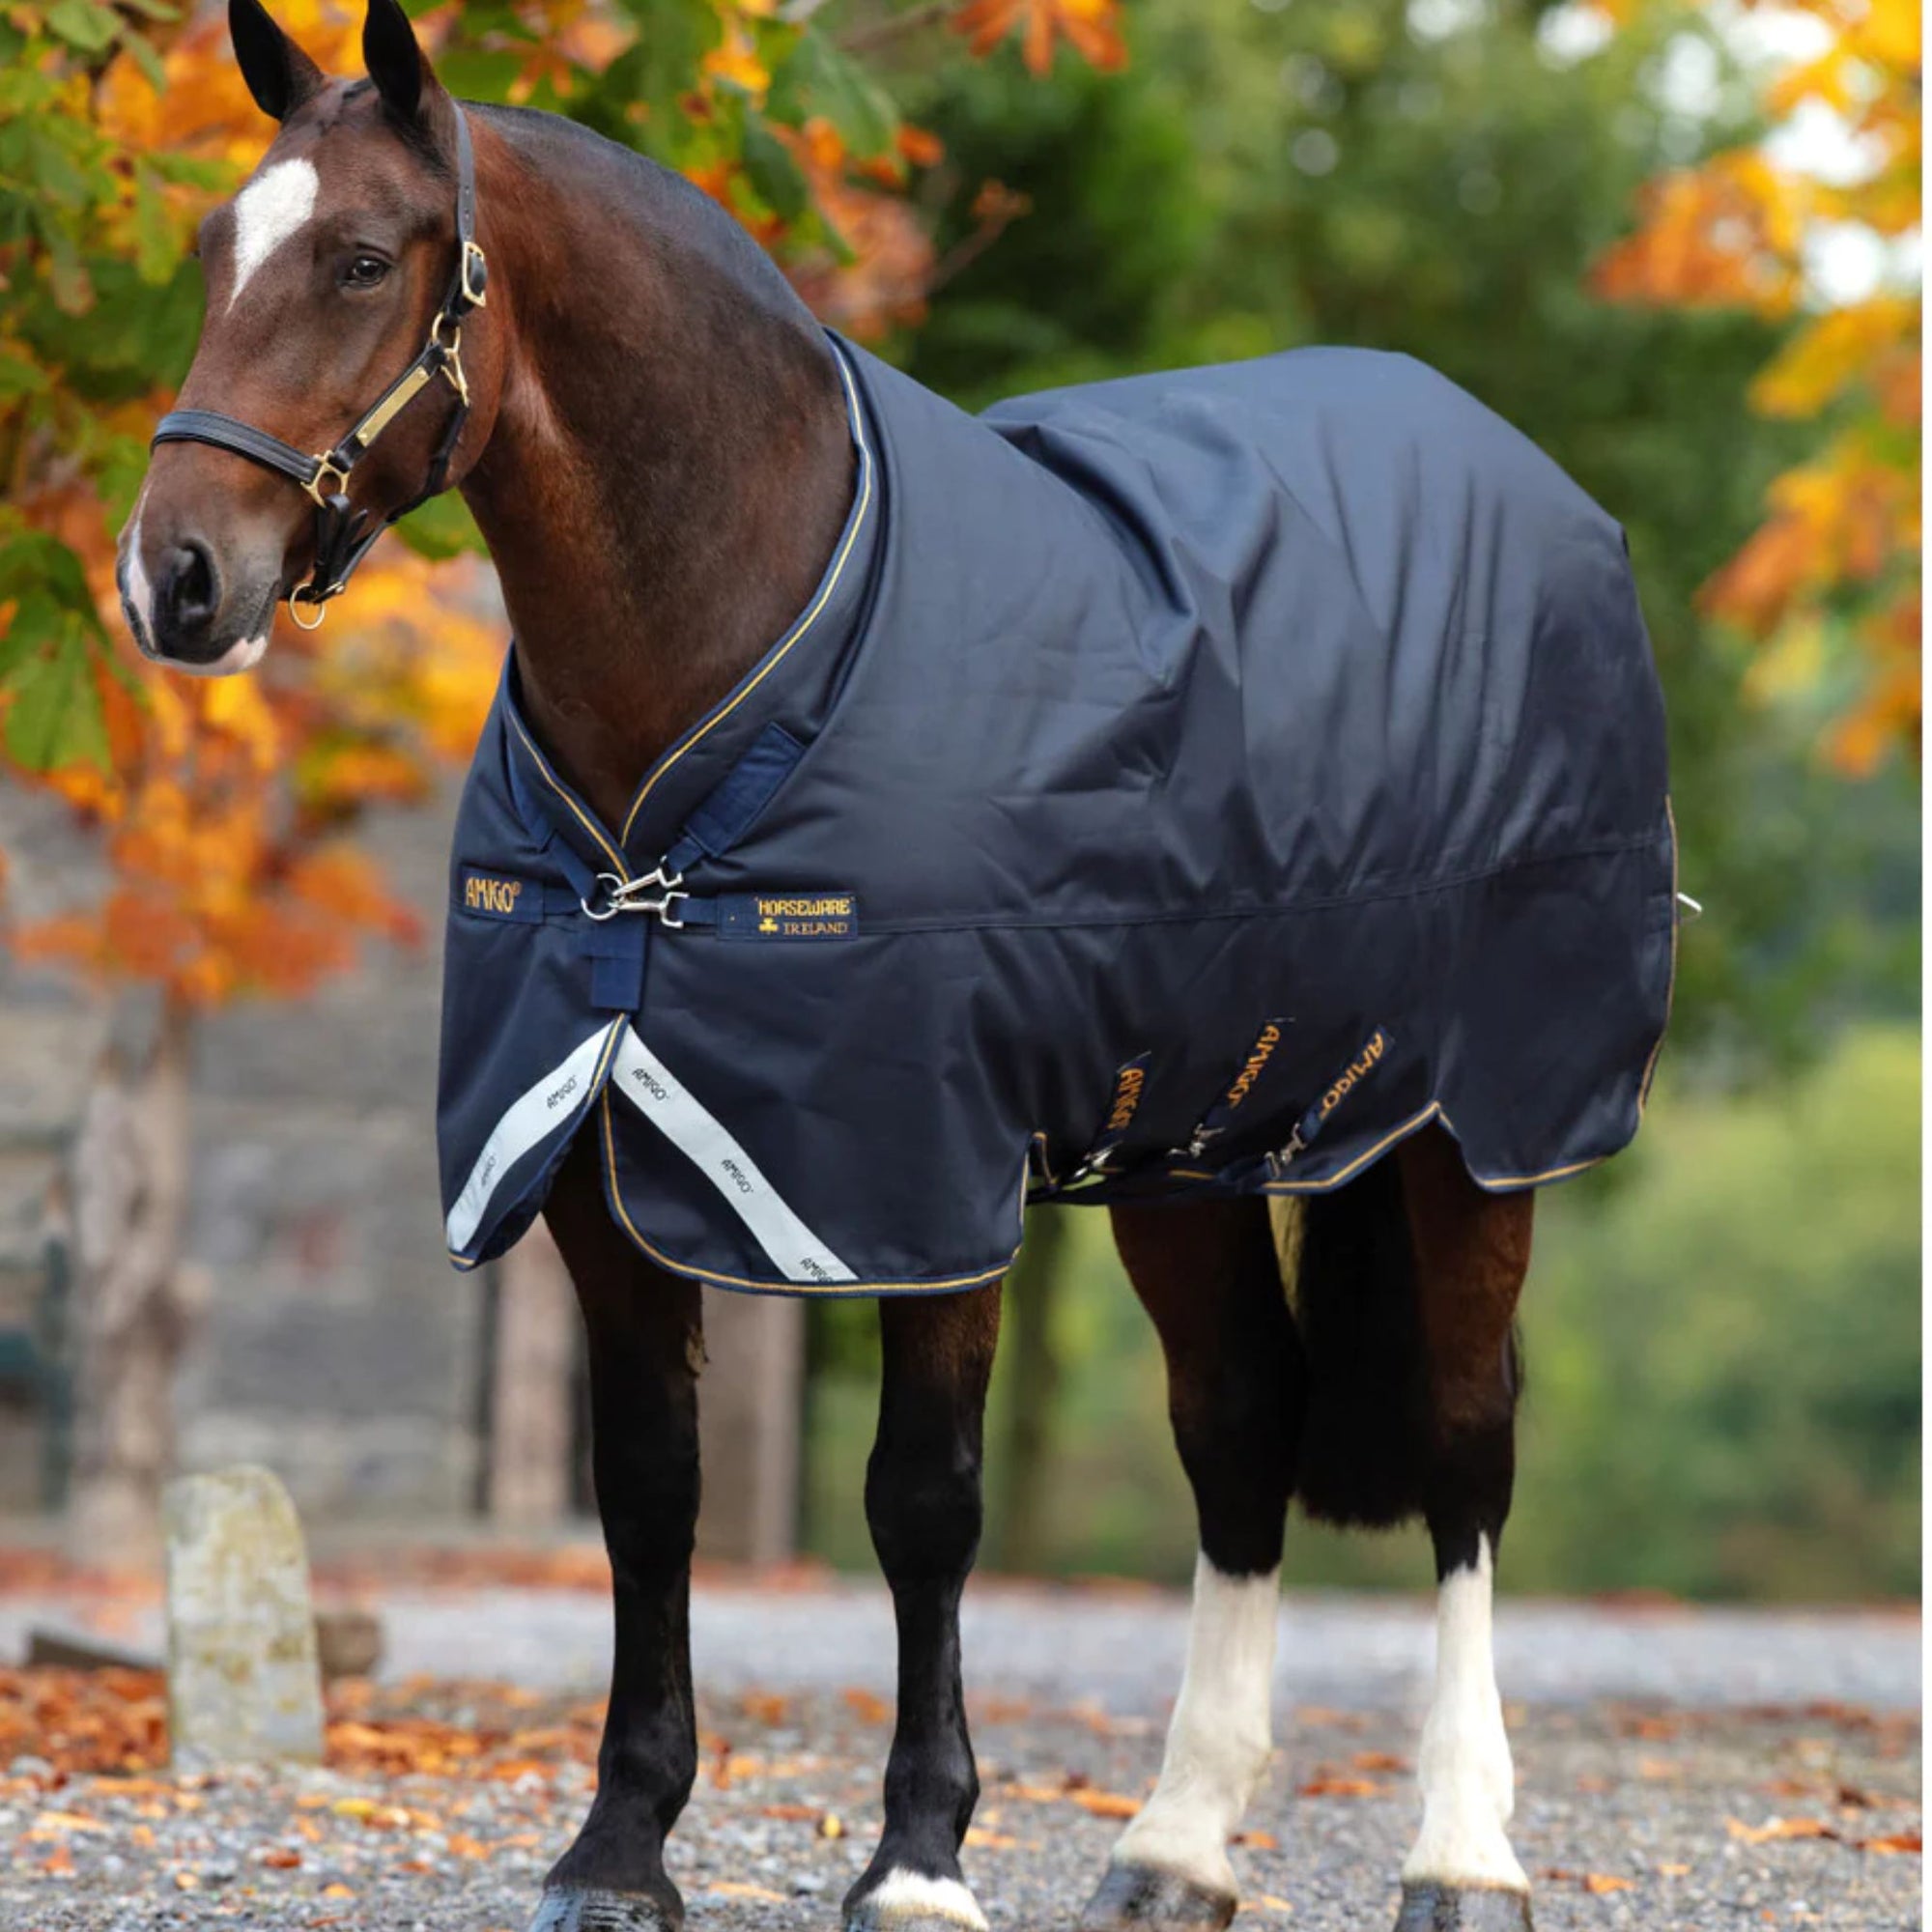 Navy horse rug with reflective strips and orange accents.